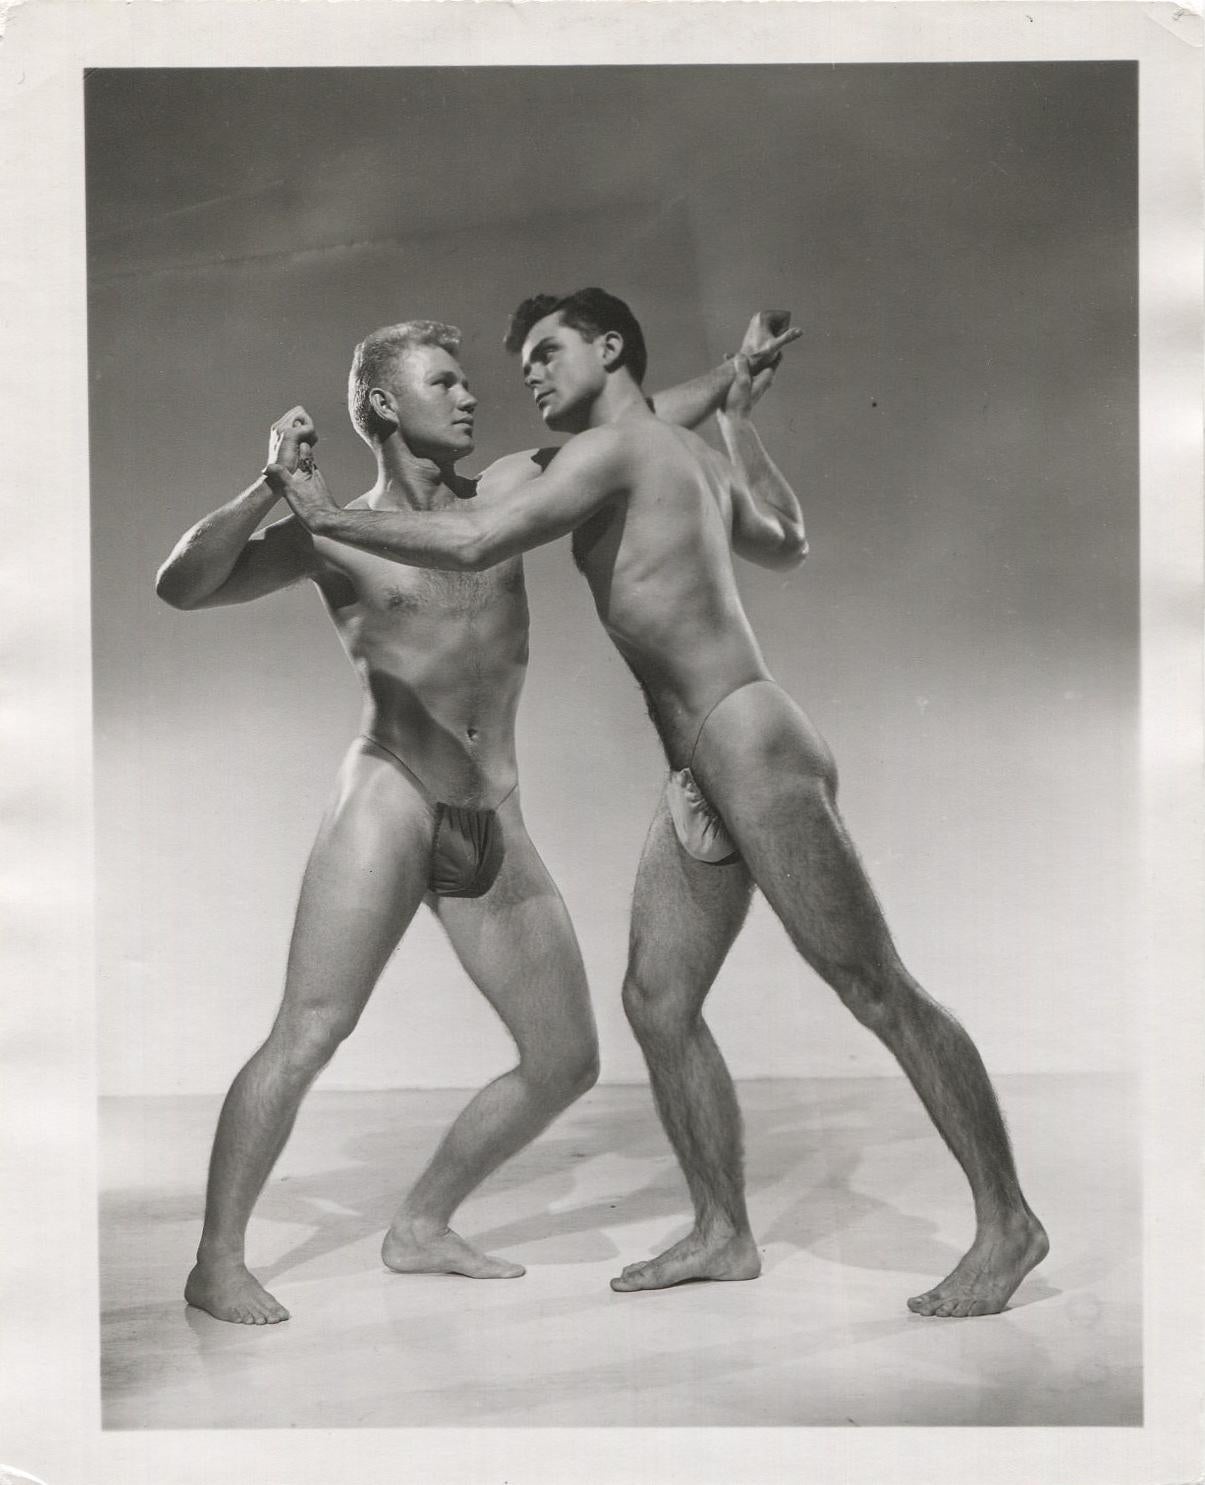 Untitled (Two Wrestlers) - Contemporary Photograph by Bob Mizer